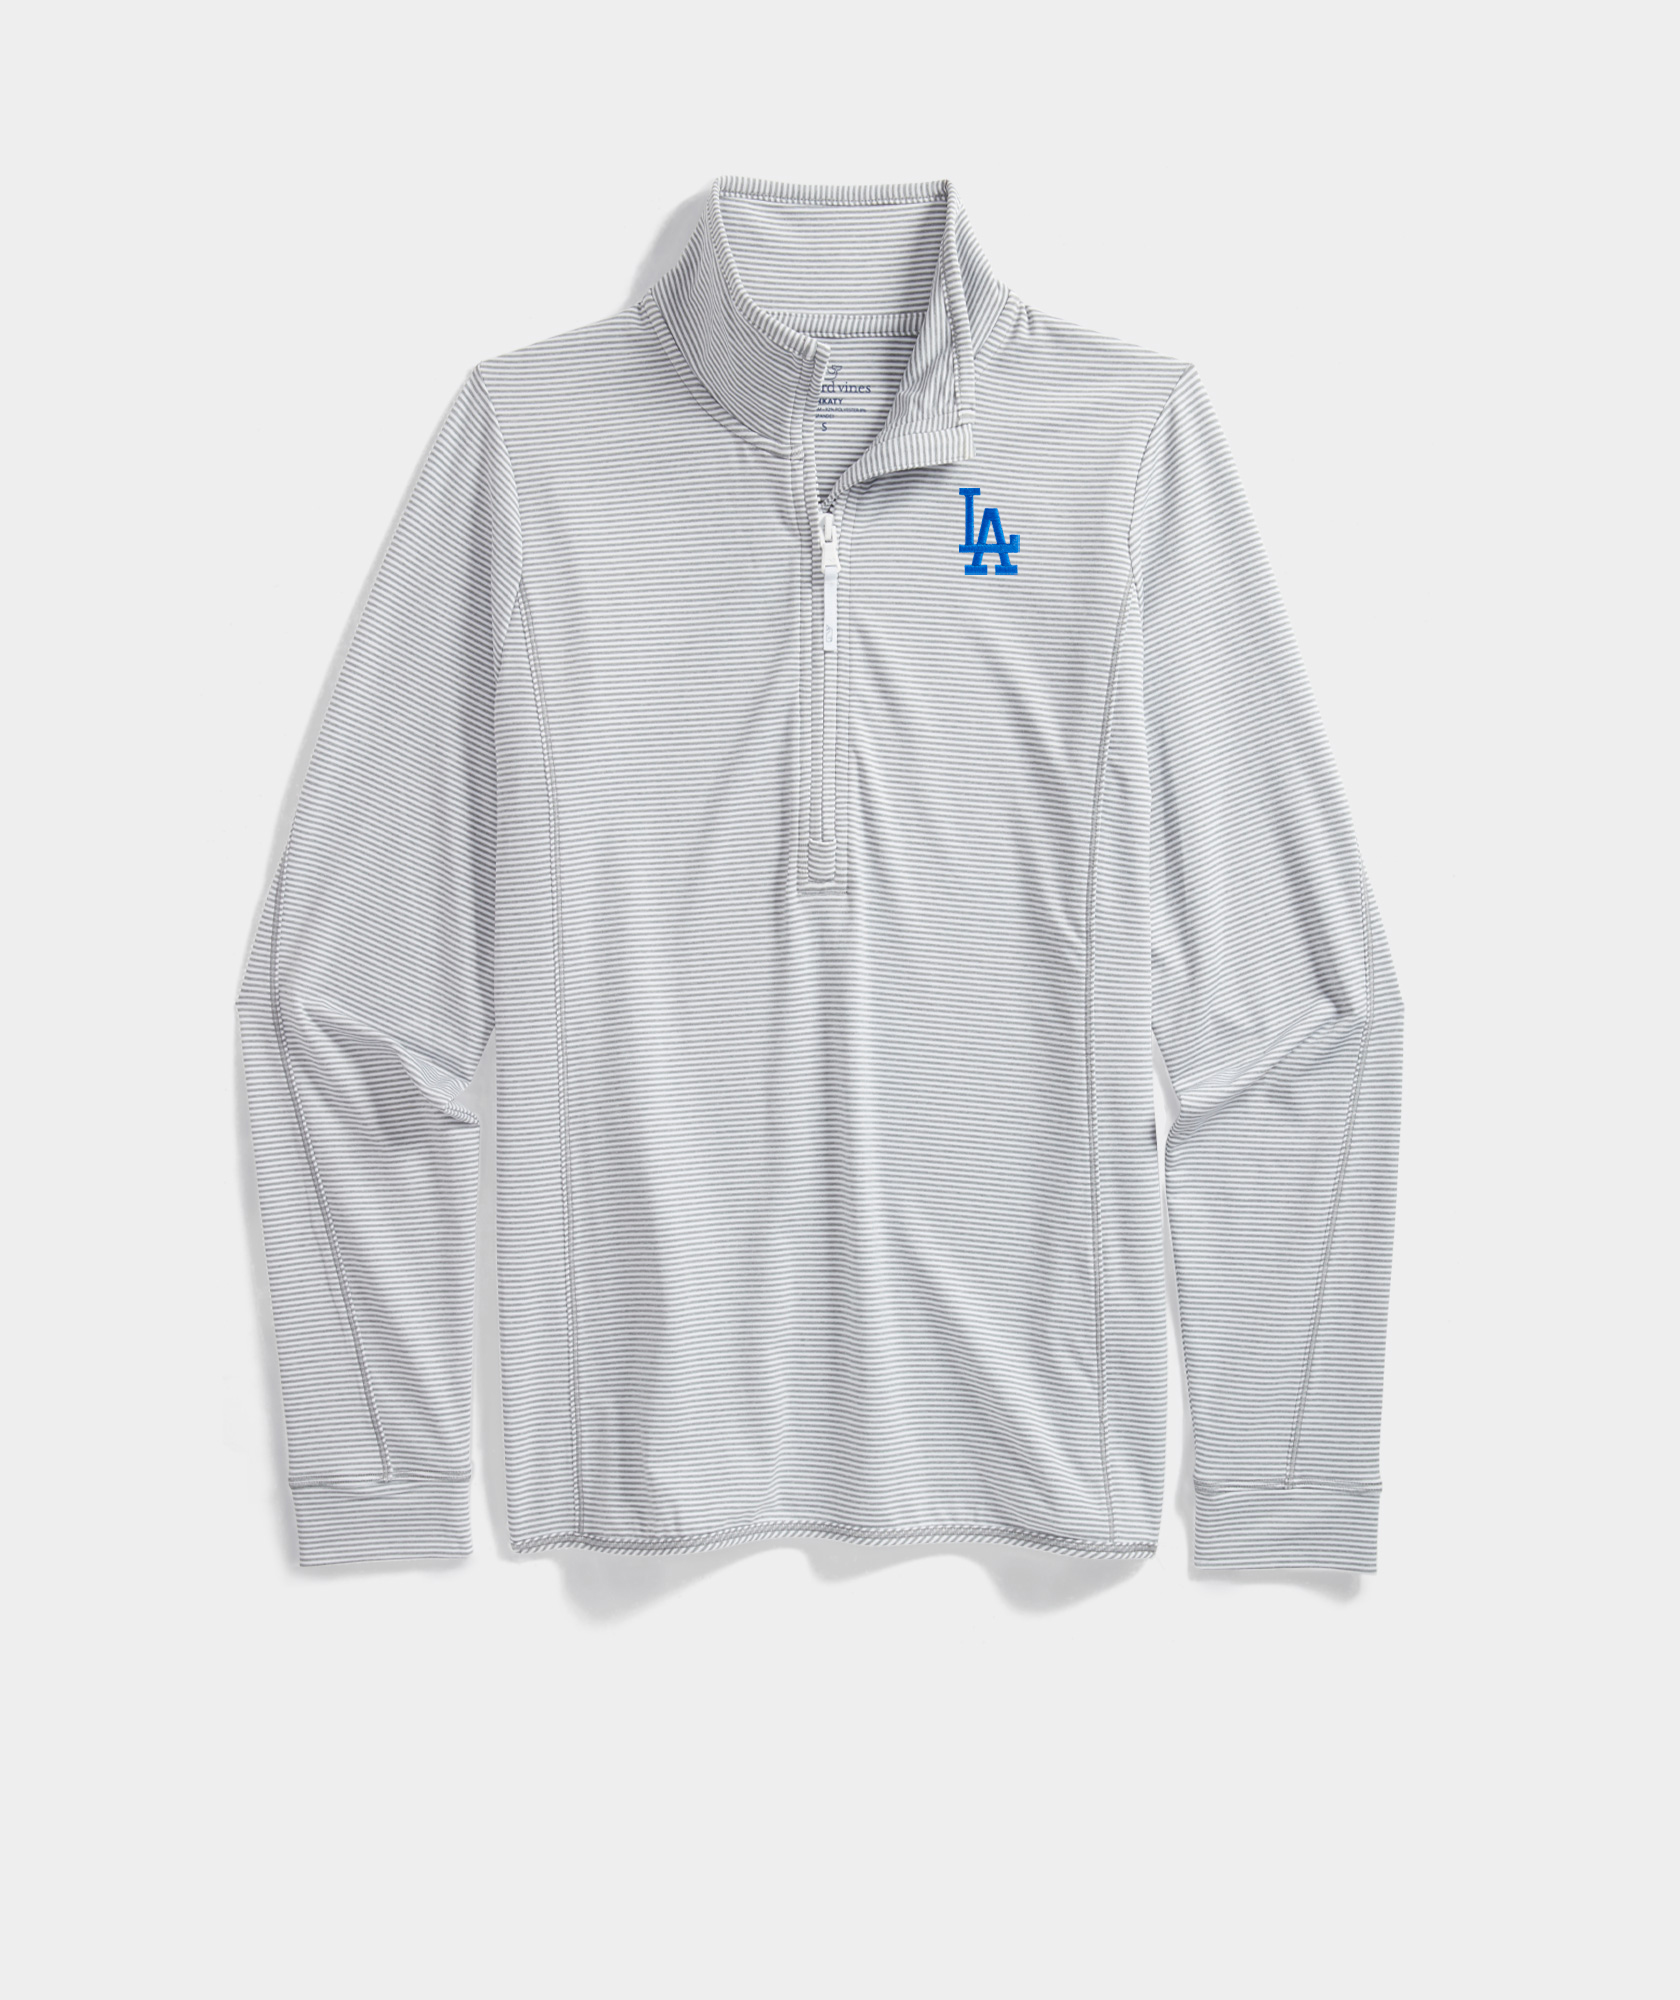 Los Angeles Dodgers MLB Nike Jersey for Men and for Women only here at